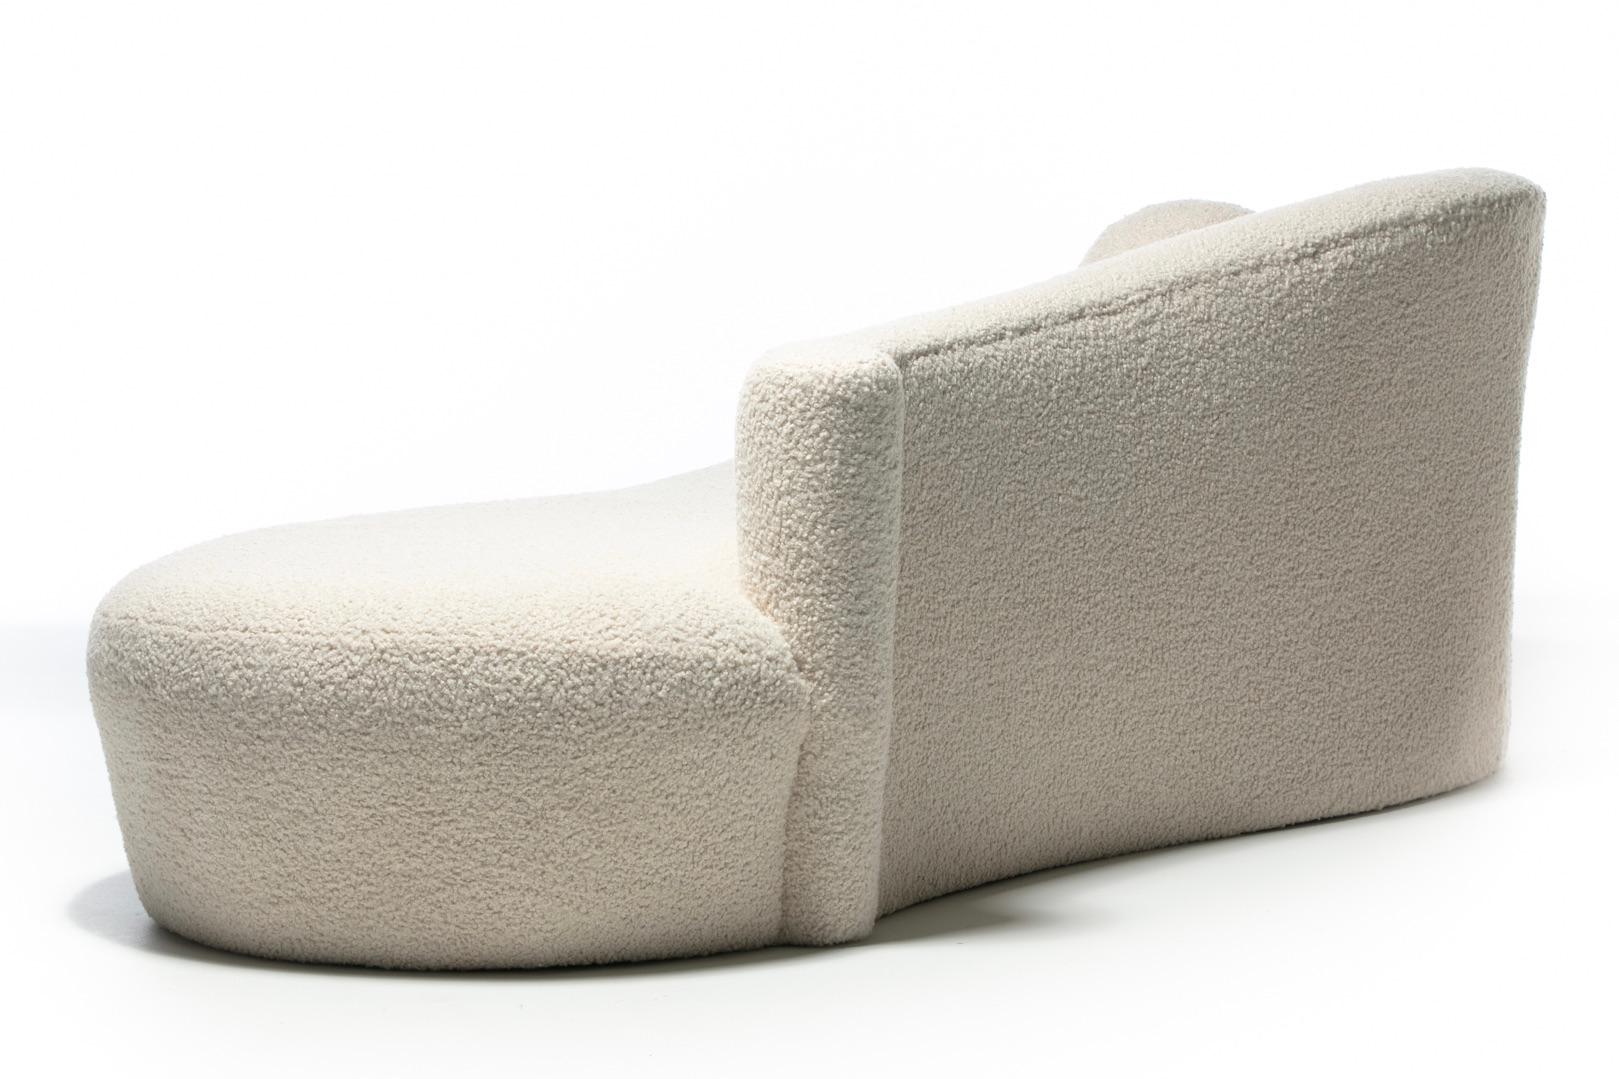 Late 20th Century Weiman Sofa / Large Chaise in Supple Lux Ivory Bouclé, c. 1990